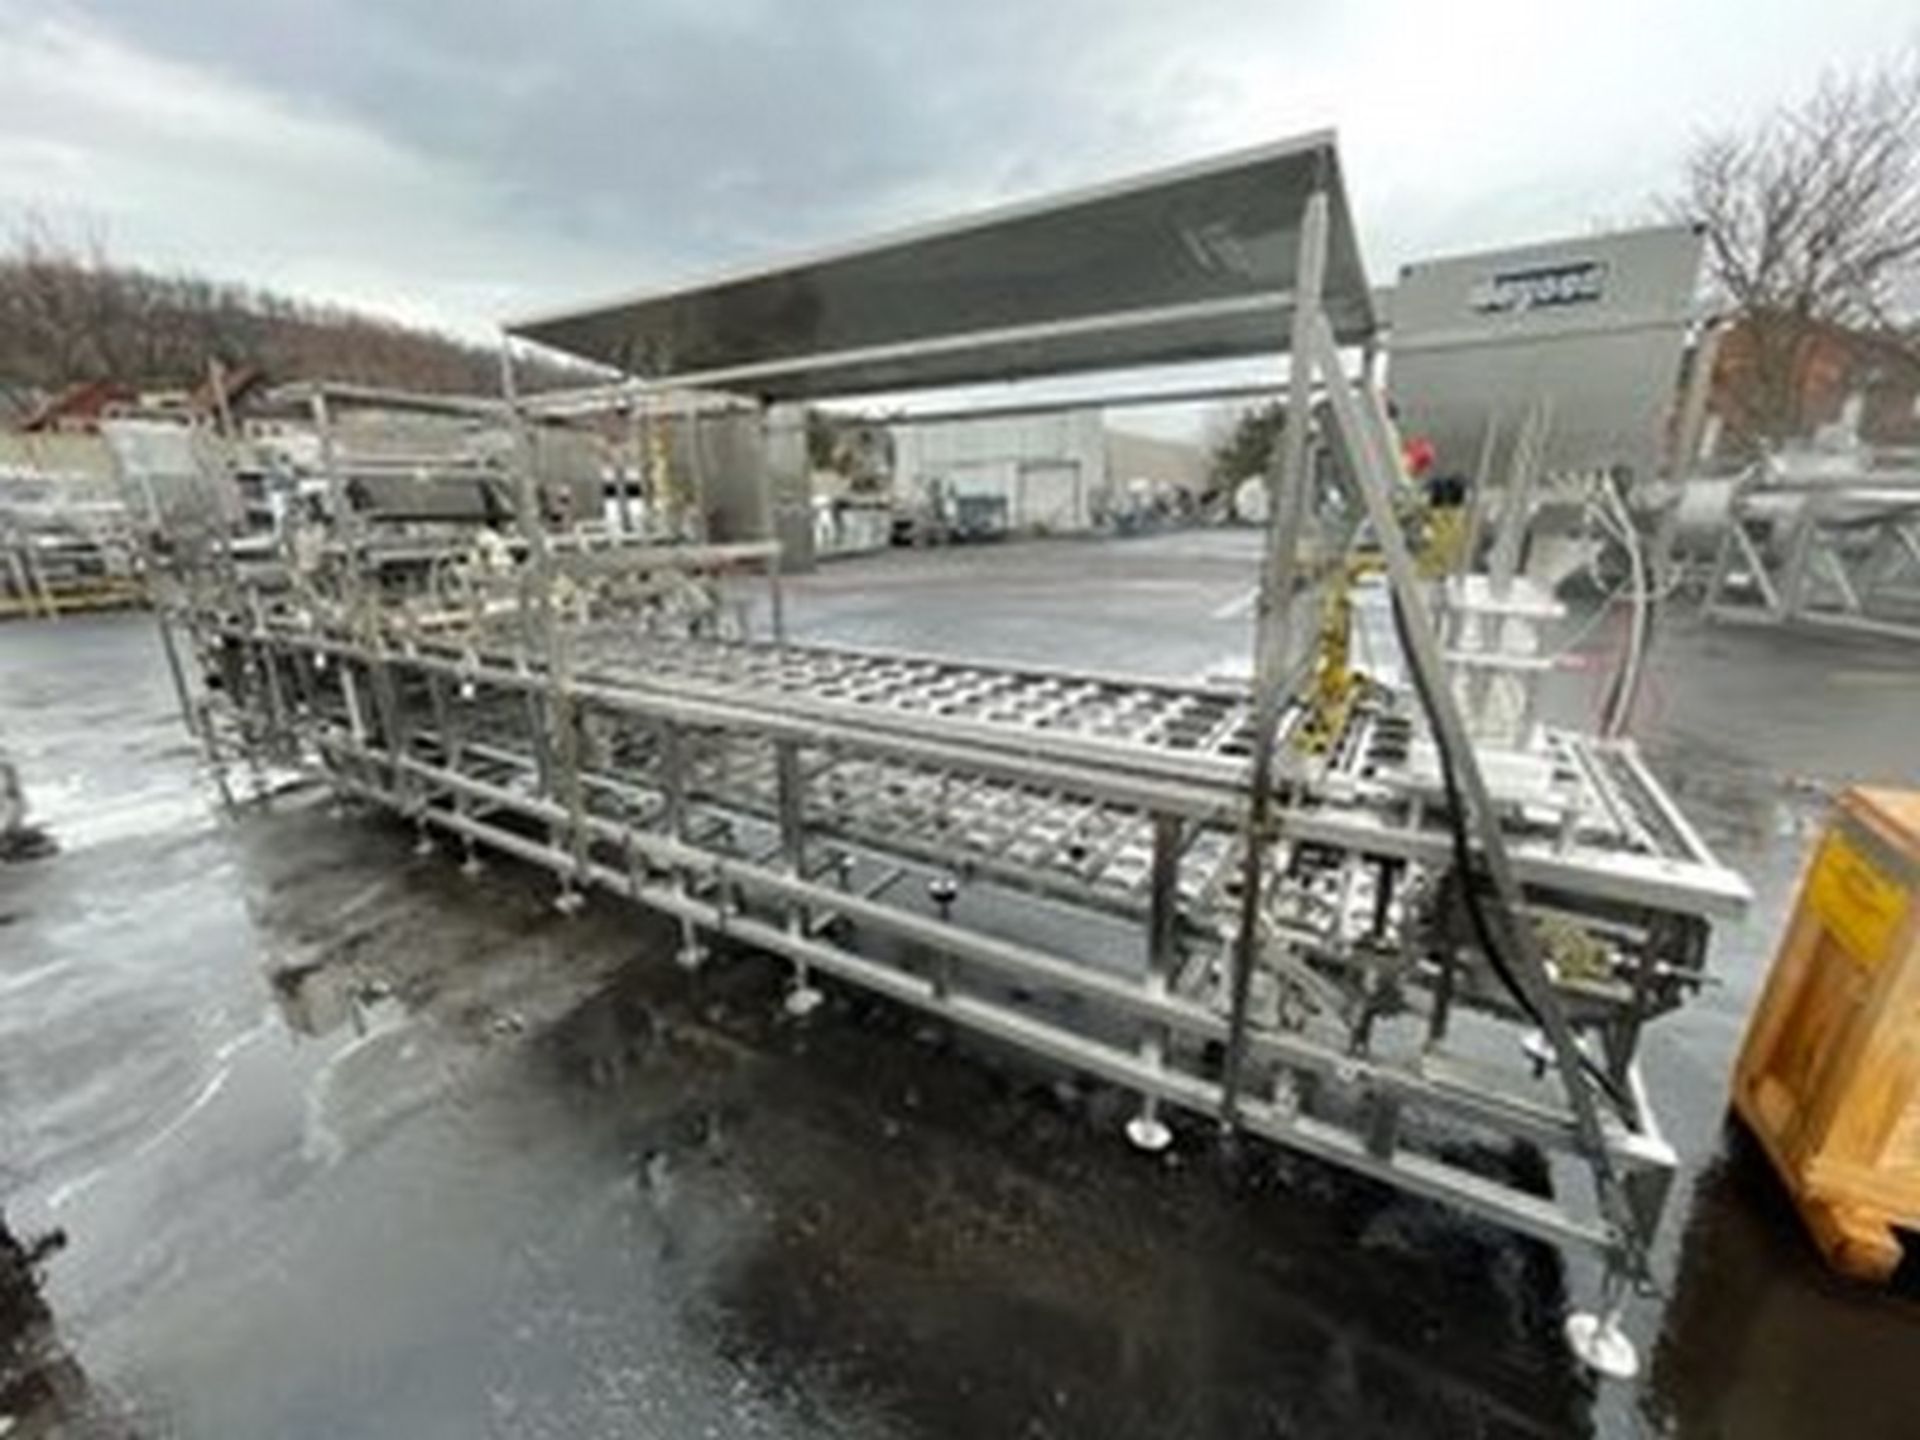 Osgood 4-Lane In-Line S/S Cup Filler,M/N 4800-E, S/N 351-840, Set Up with 3-5/8" W On-Board Change - Image 2 of 18